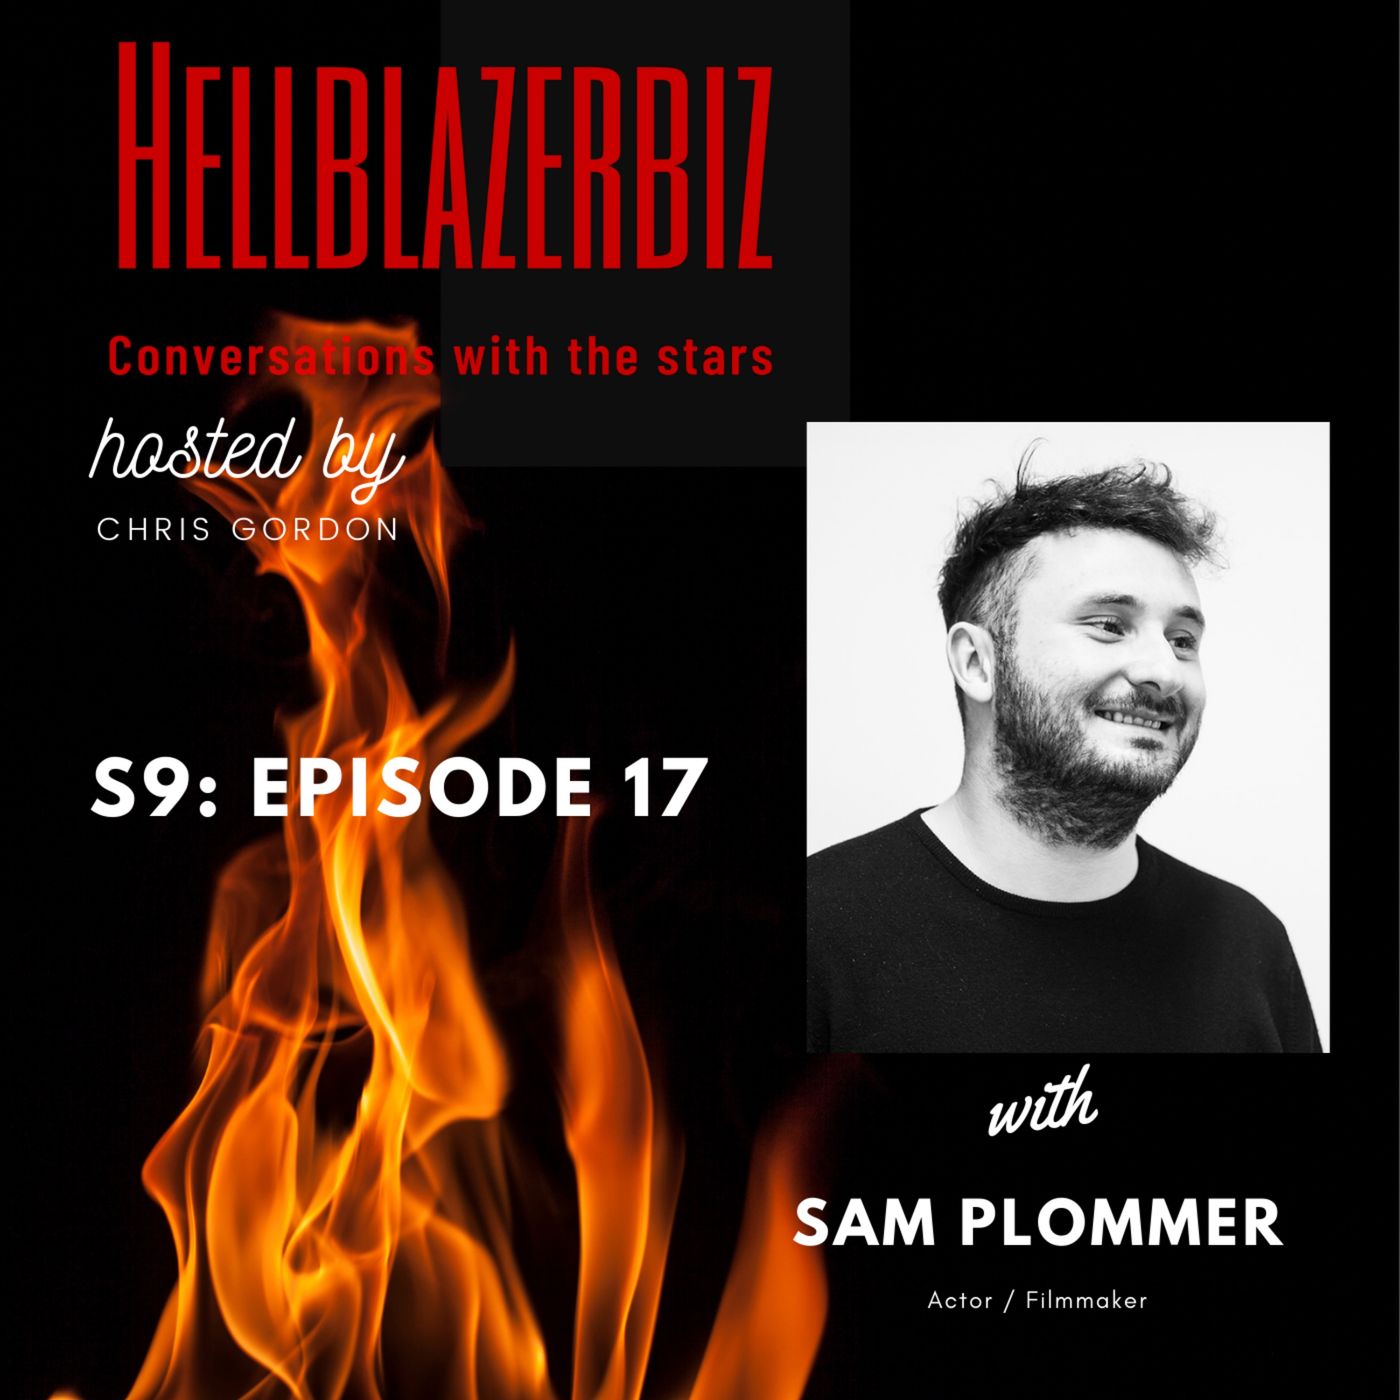 Sam Plommer, filmmaker, chats to me about his latest film